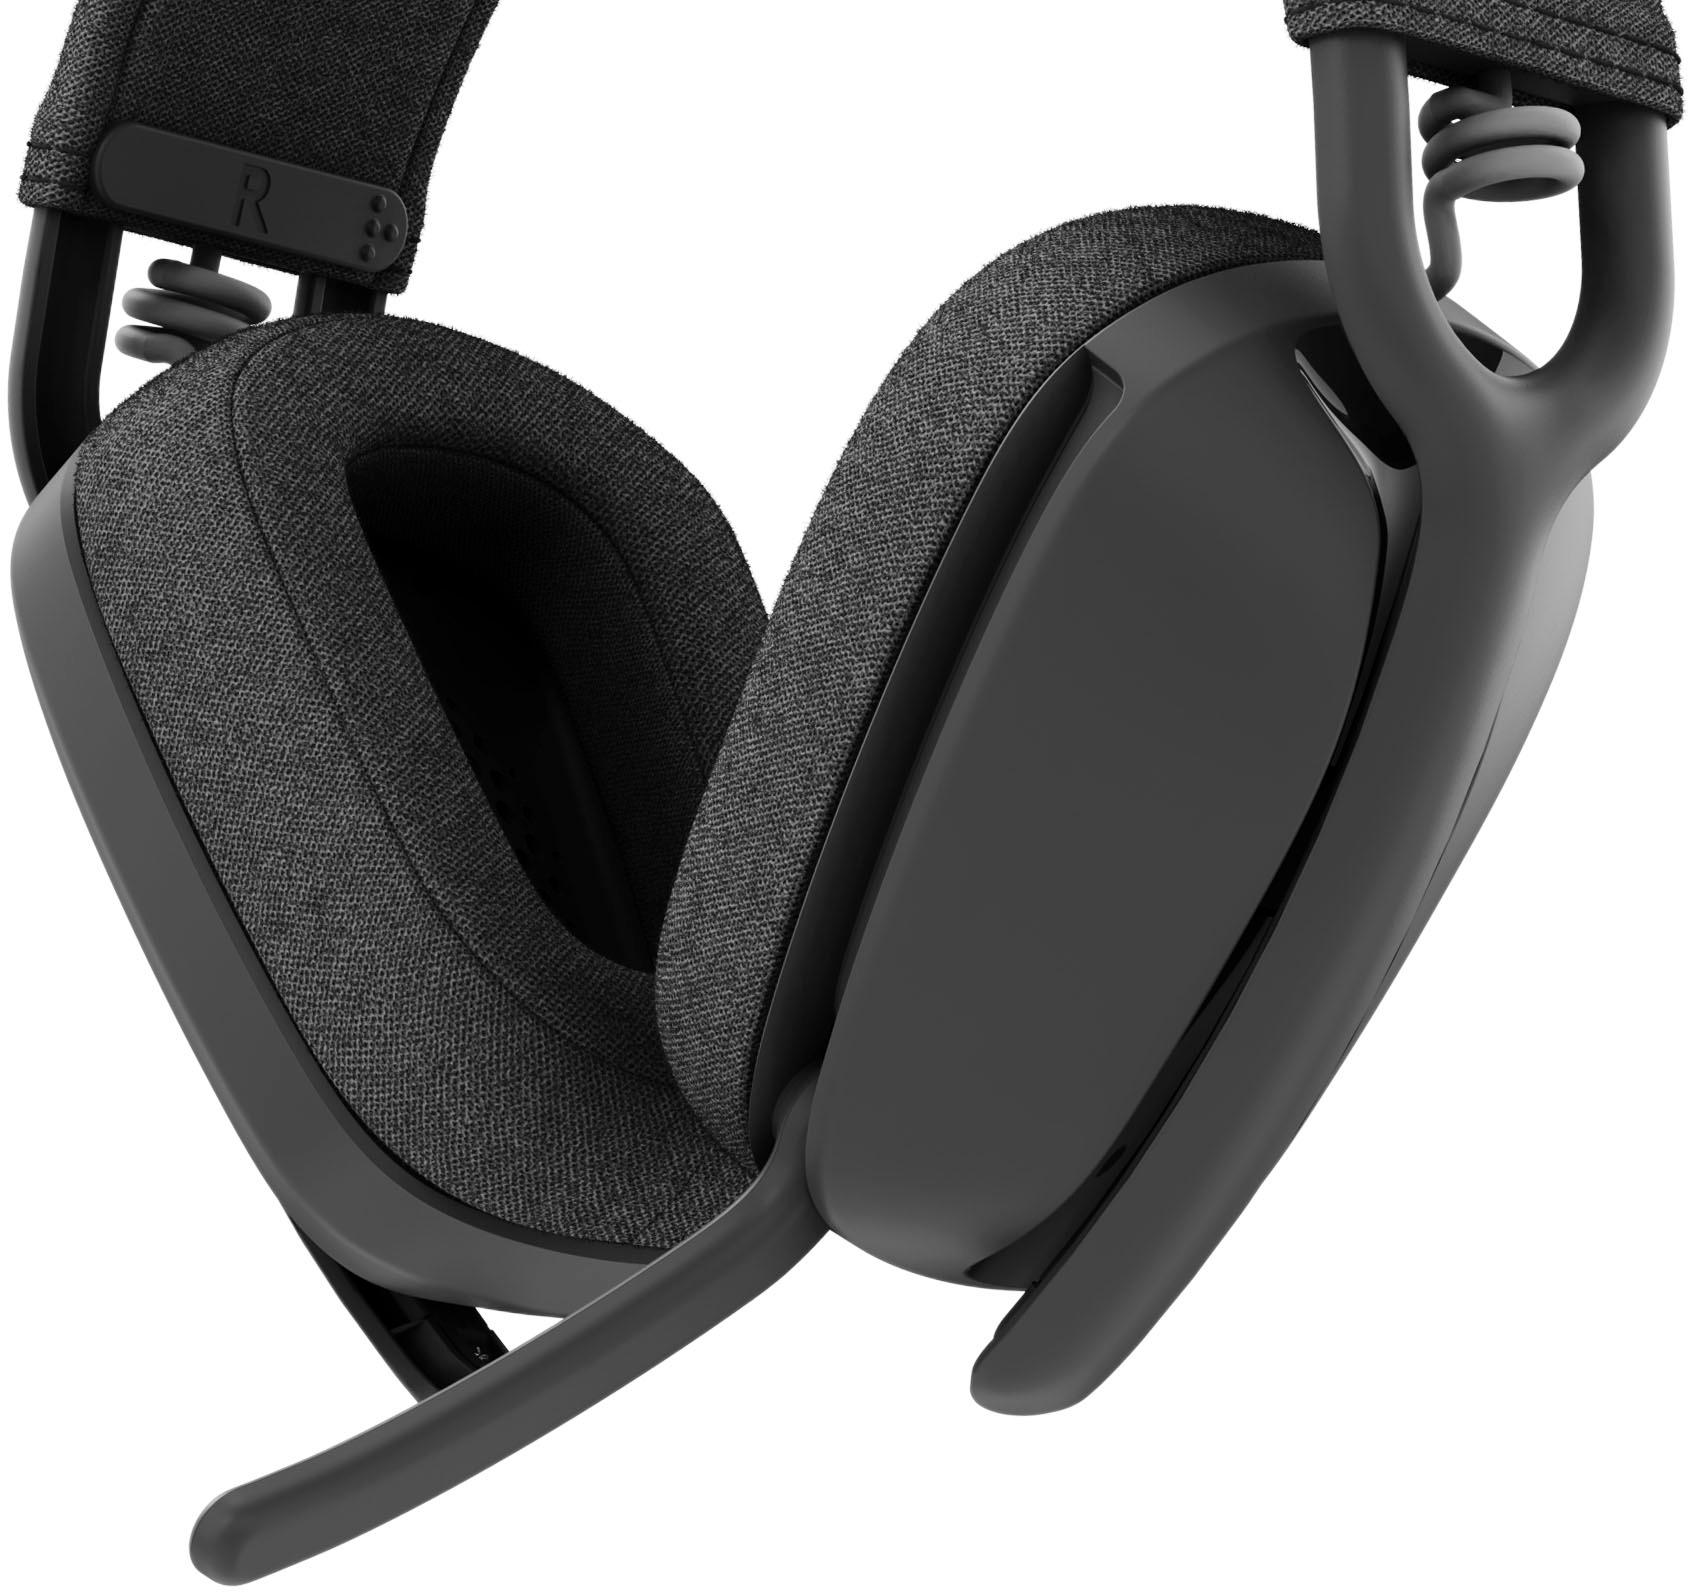 Logitech Zone - Wireless 981-001166 Noise-Canceling 125 Graphite with Best Buy Over-the-Ear Headphones Vibe Microphone